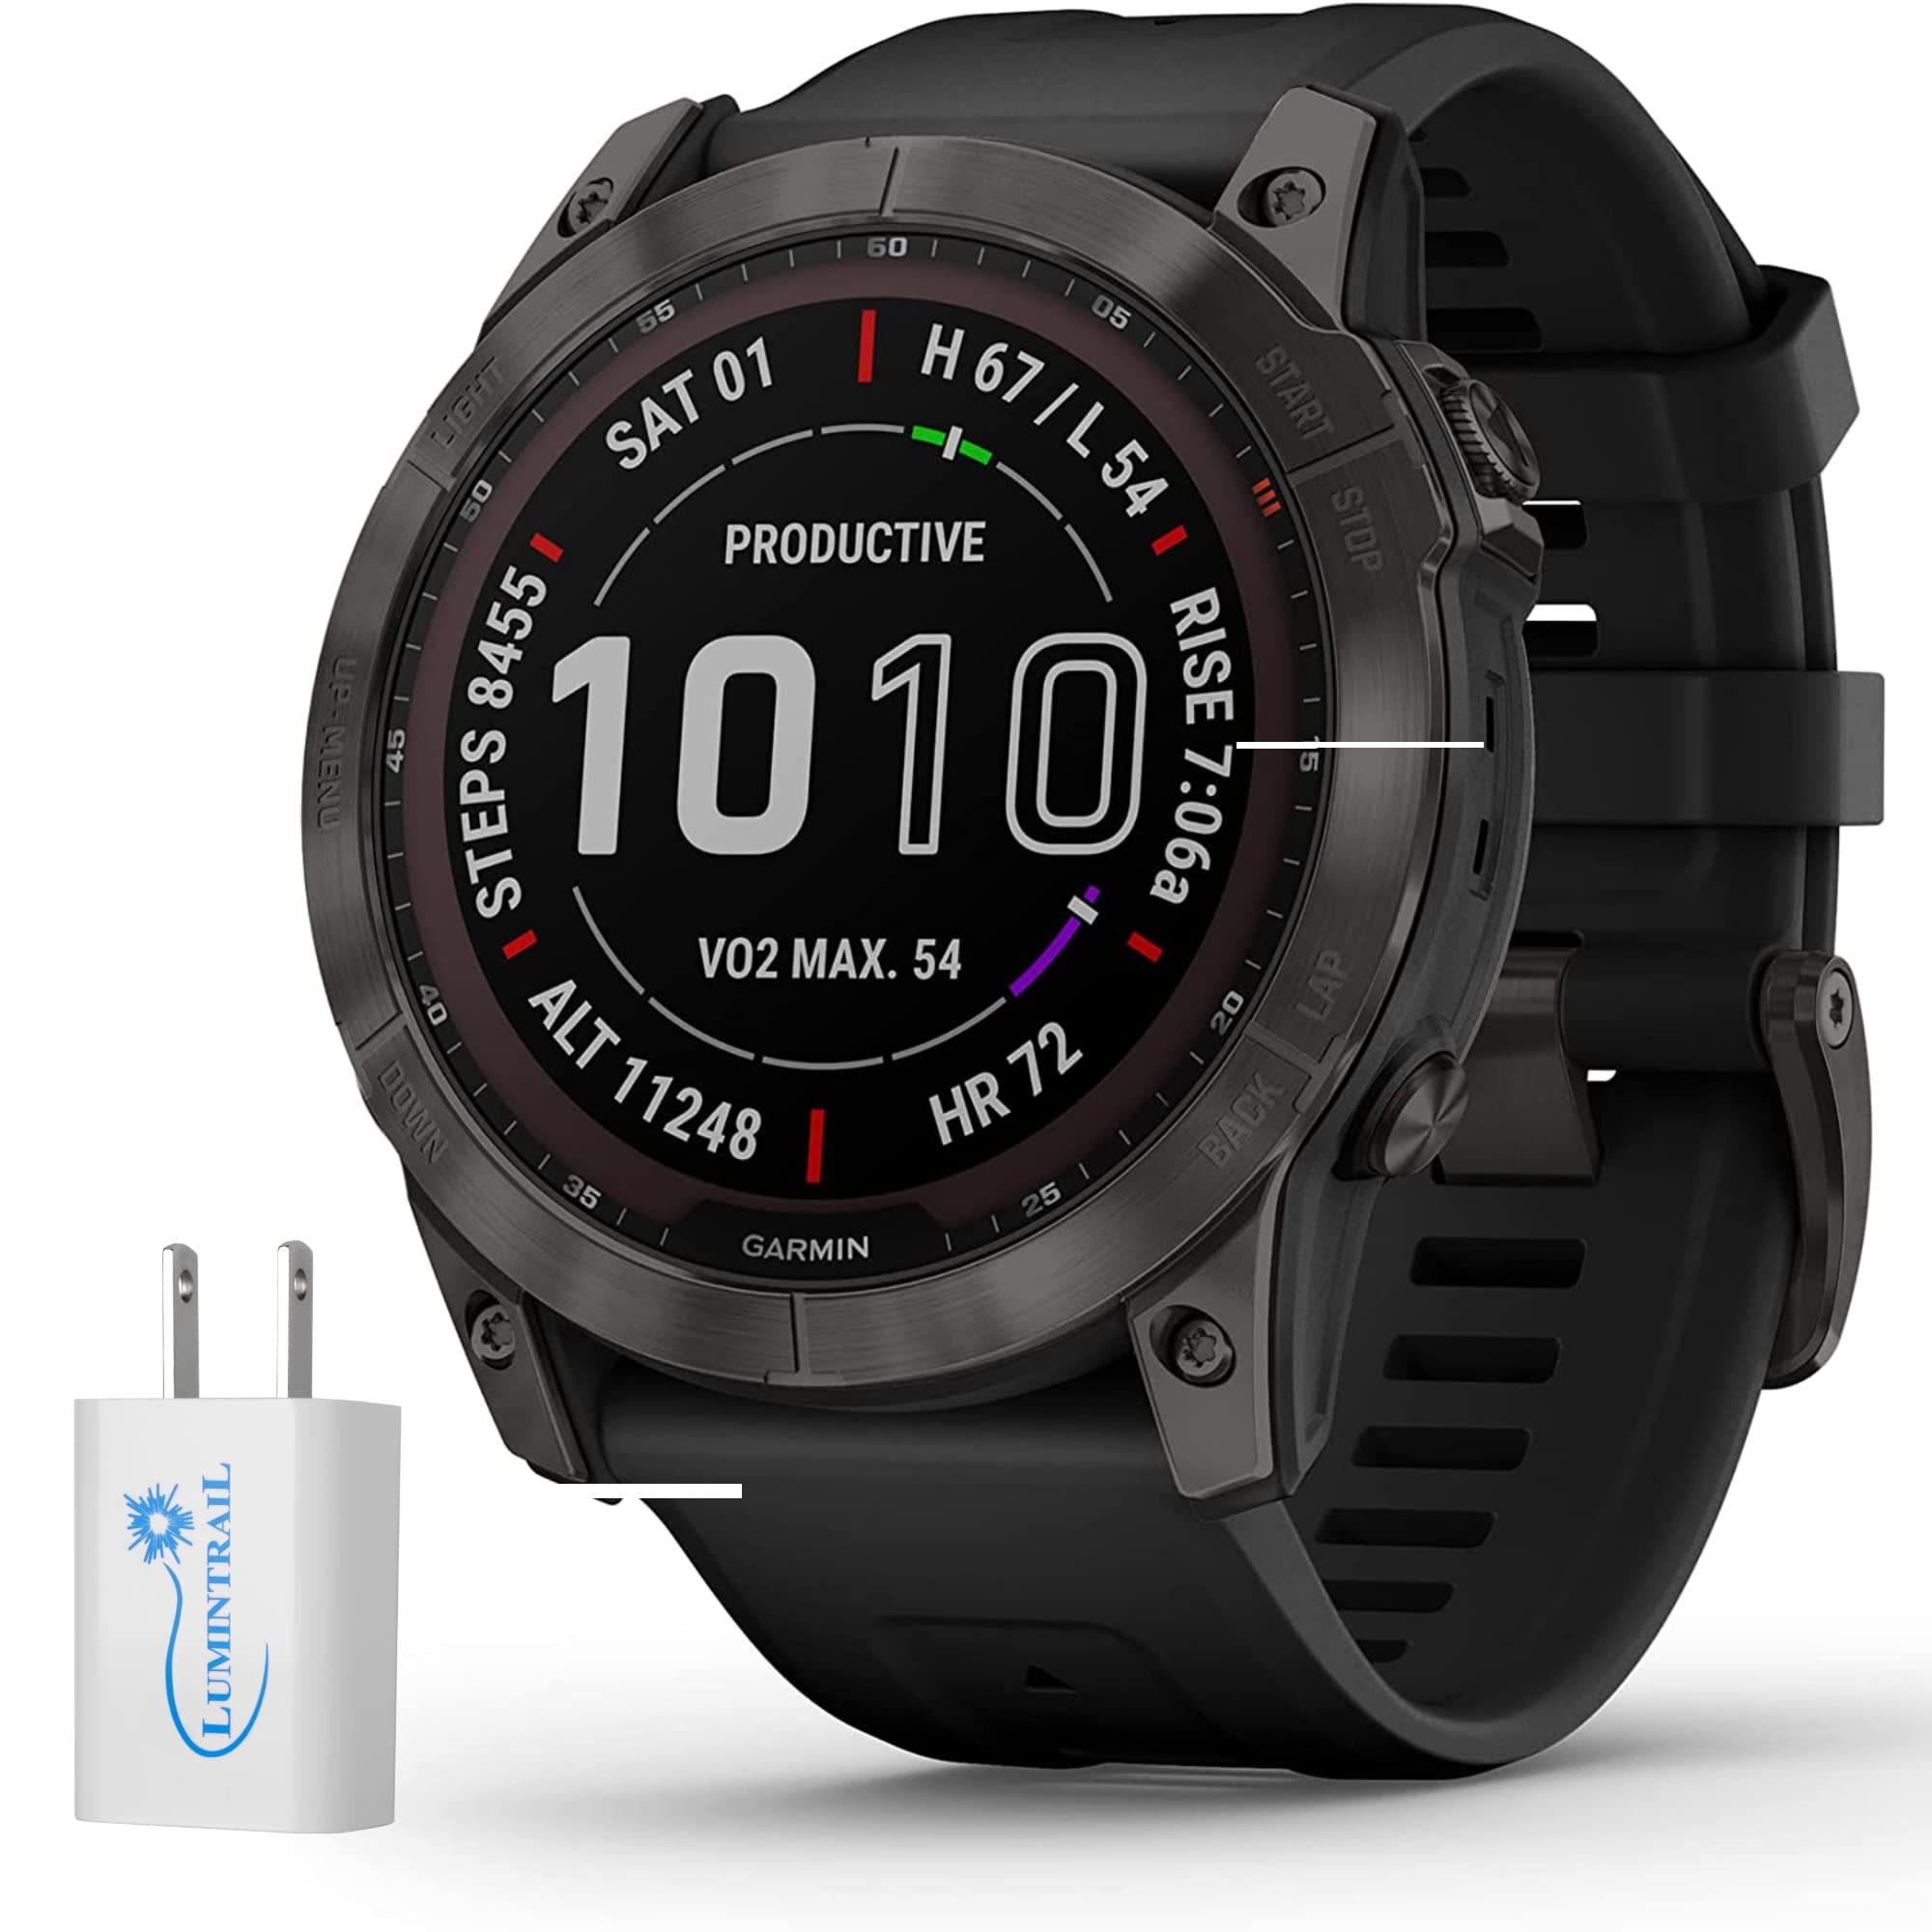 Lumintrail Garmin Fenix 7X Sapphire Solar Edition Smart Watch, Large 51 MM Adventure Smartwatch, Rugged Outdoor Watch with GPS, Touchscreen, Carbon Gray DLC Titanium with Black Band, with a Wall Plug